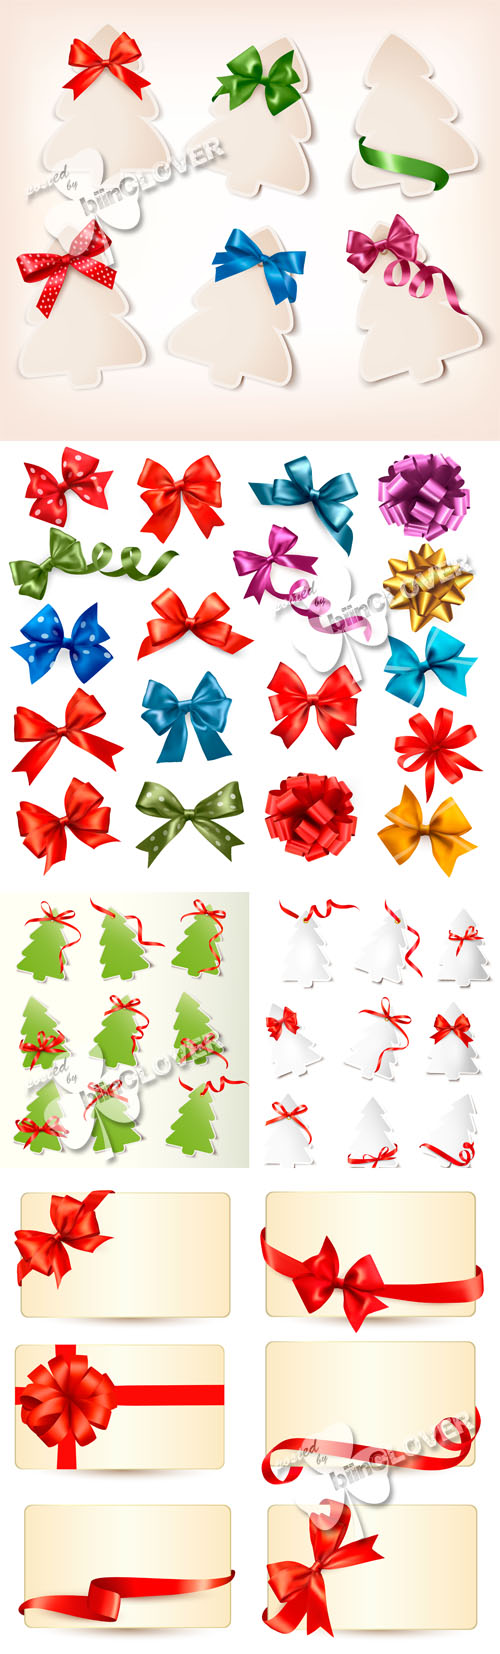 Christmas gift cards with ribbons and bows 0521